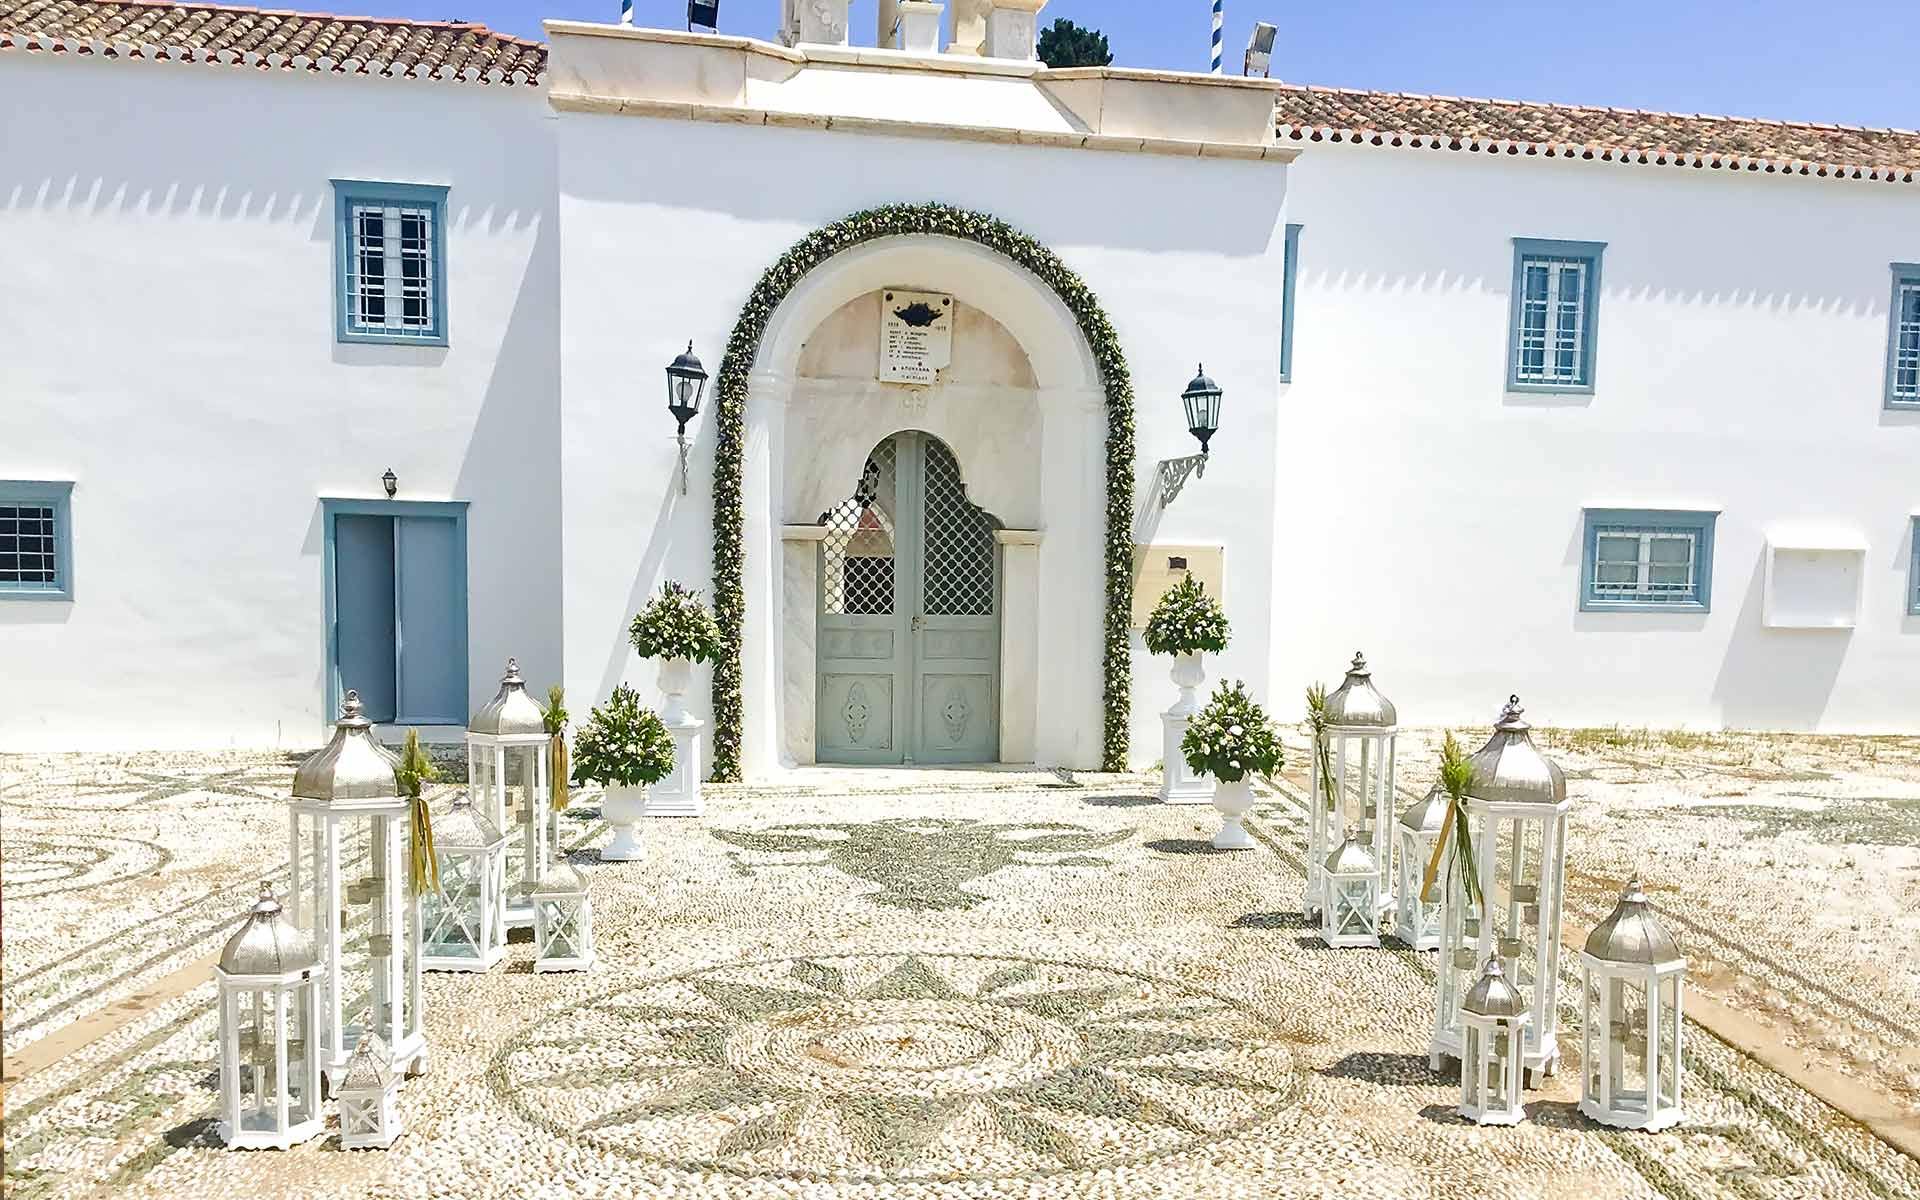 Agios-Nikolaos-in-Spetses-full-of-beautiful-marble-decorative-archways-and-lovely-mosaic-tiled-floors-decorated-for-a-wedding